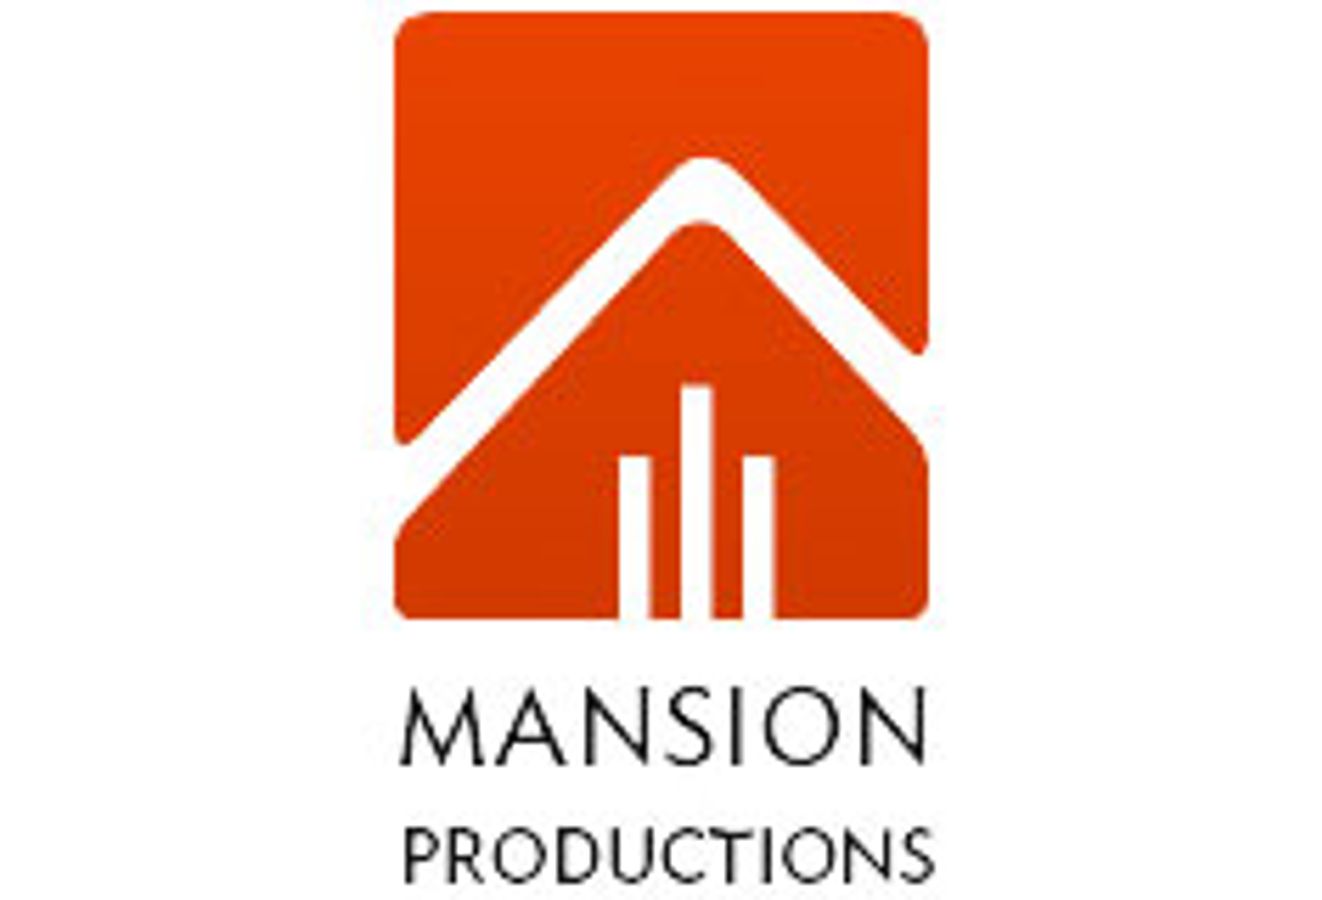 Mansion Productions